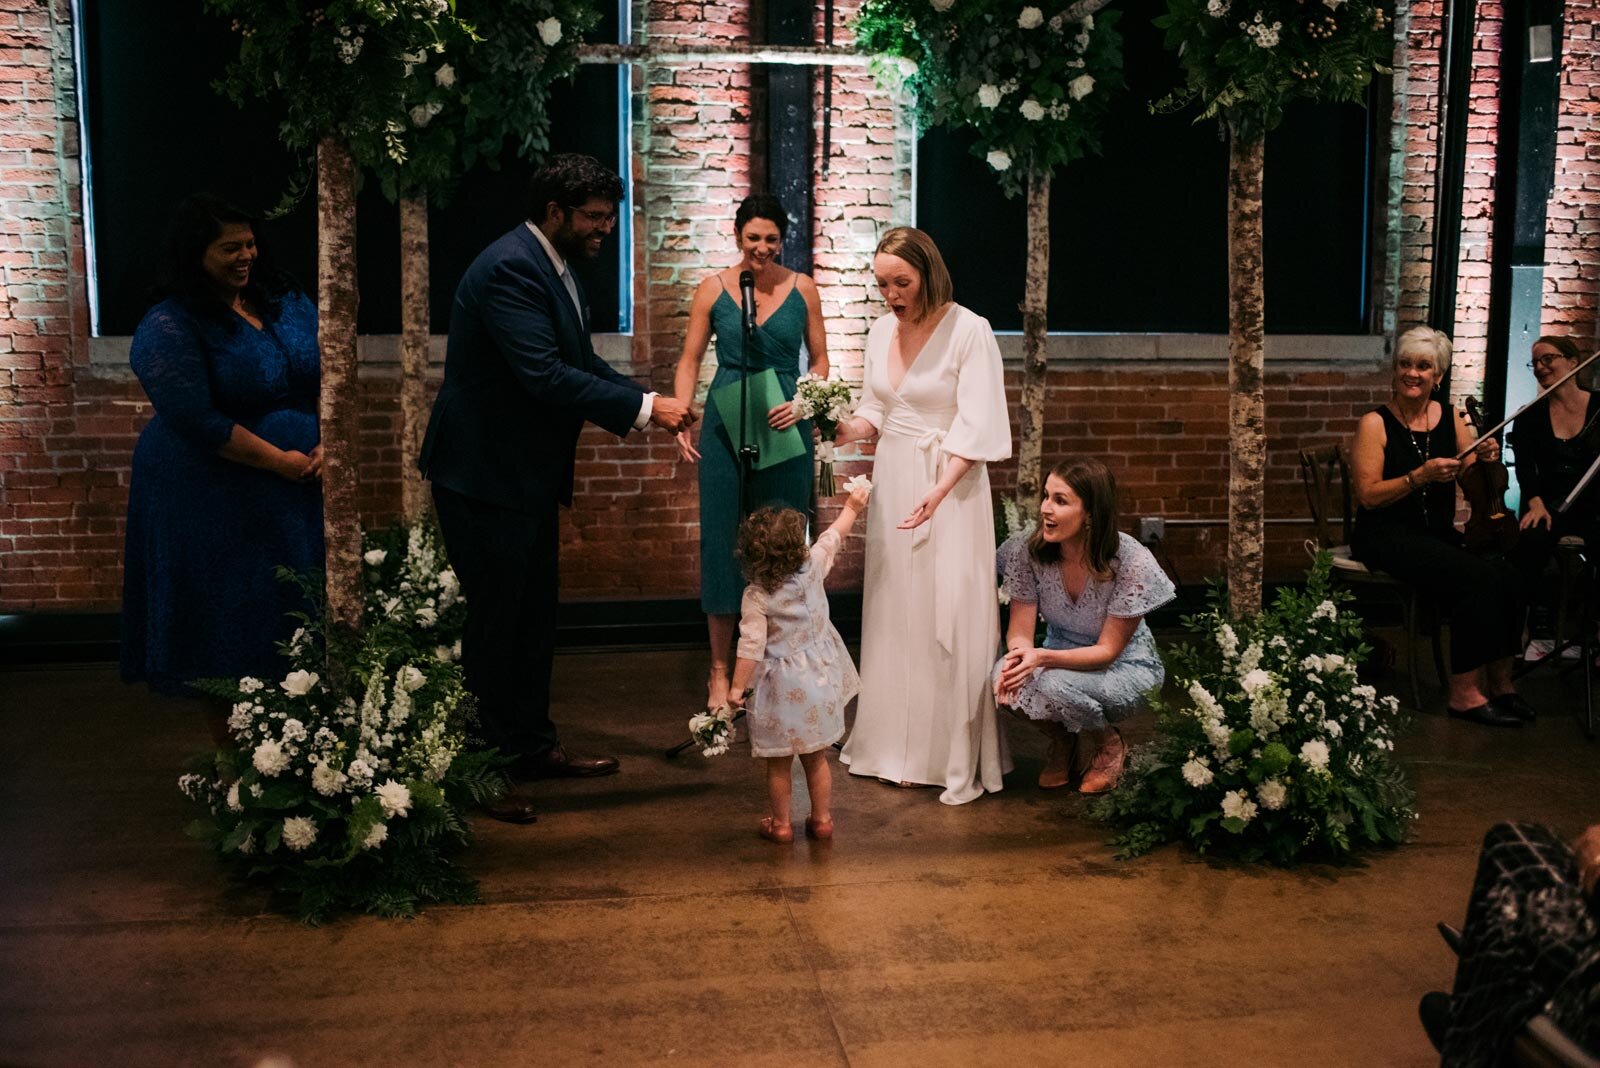 Flower girl offering petals to bride during wedding in Pittsburgh Opera PA Carly Romeo